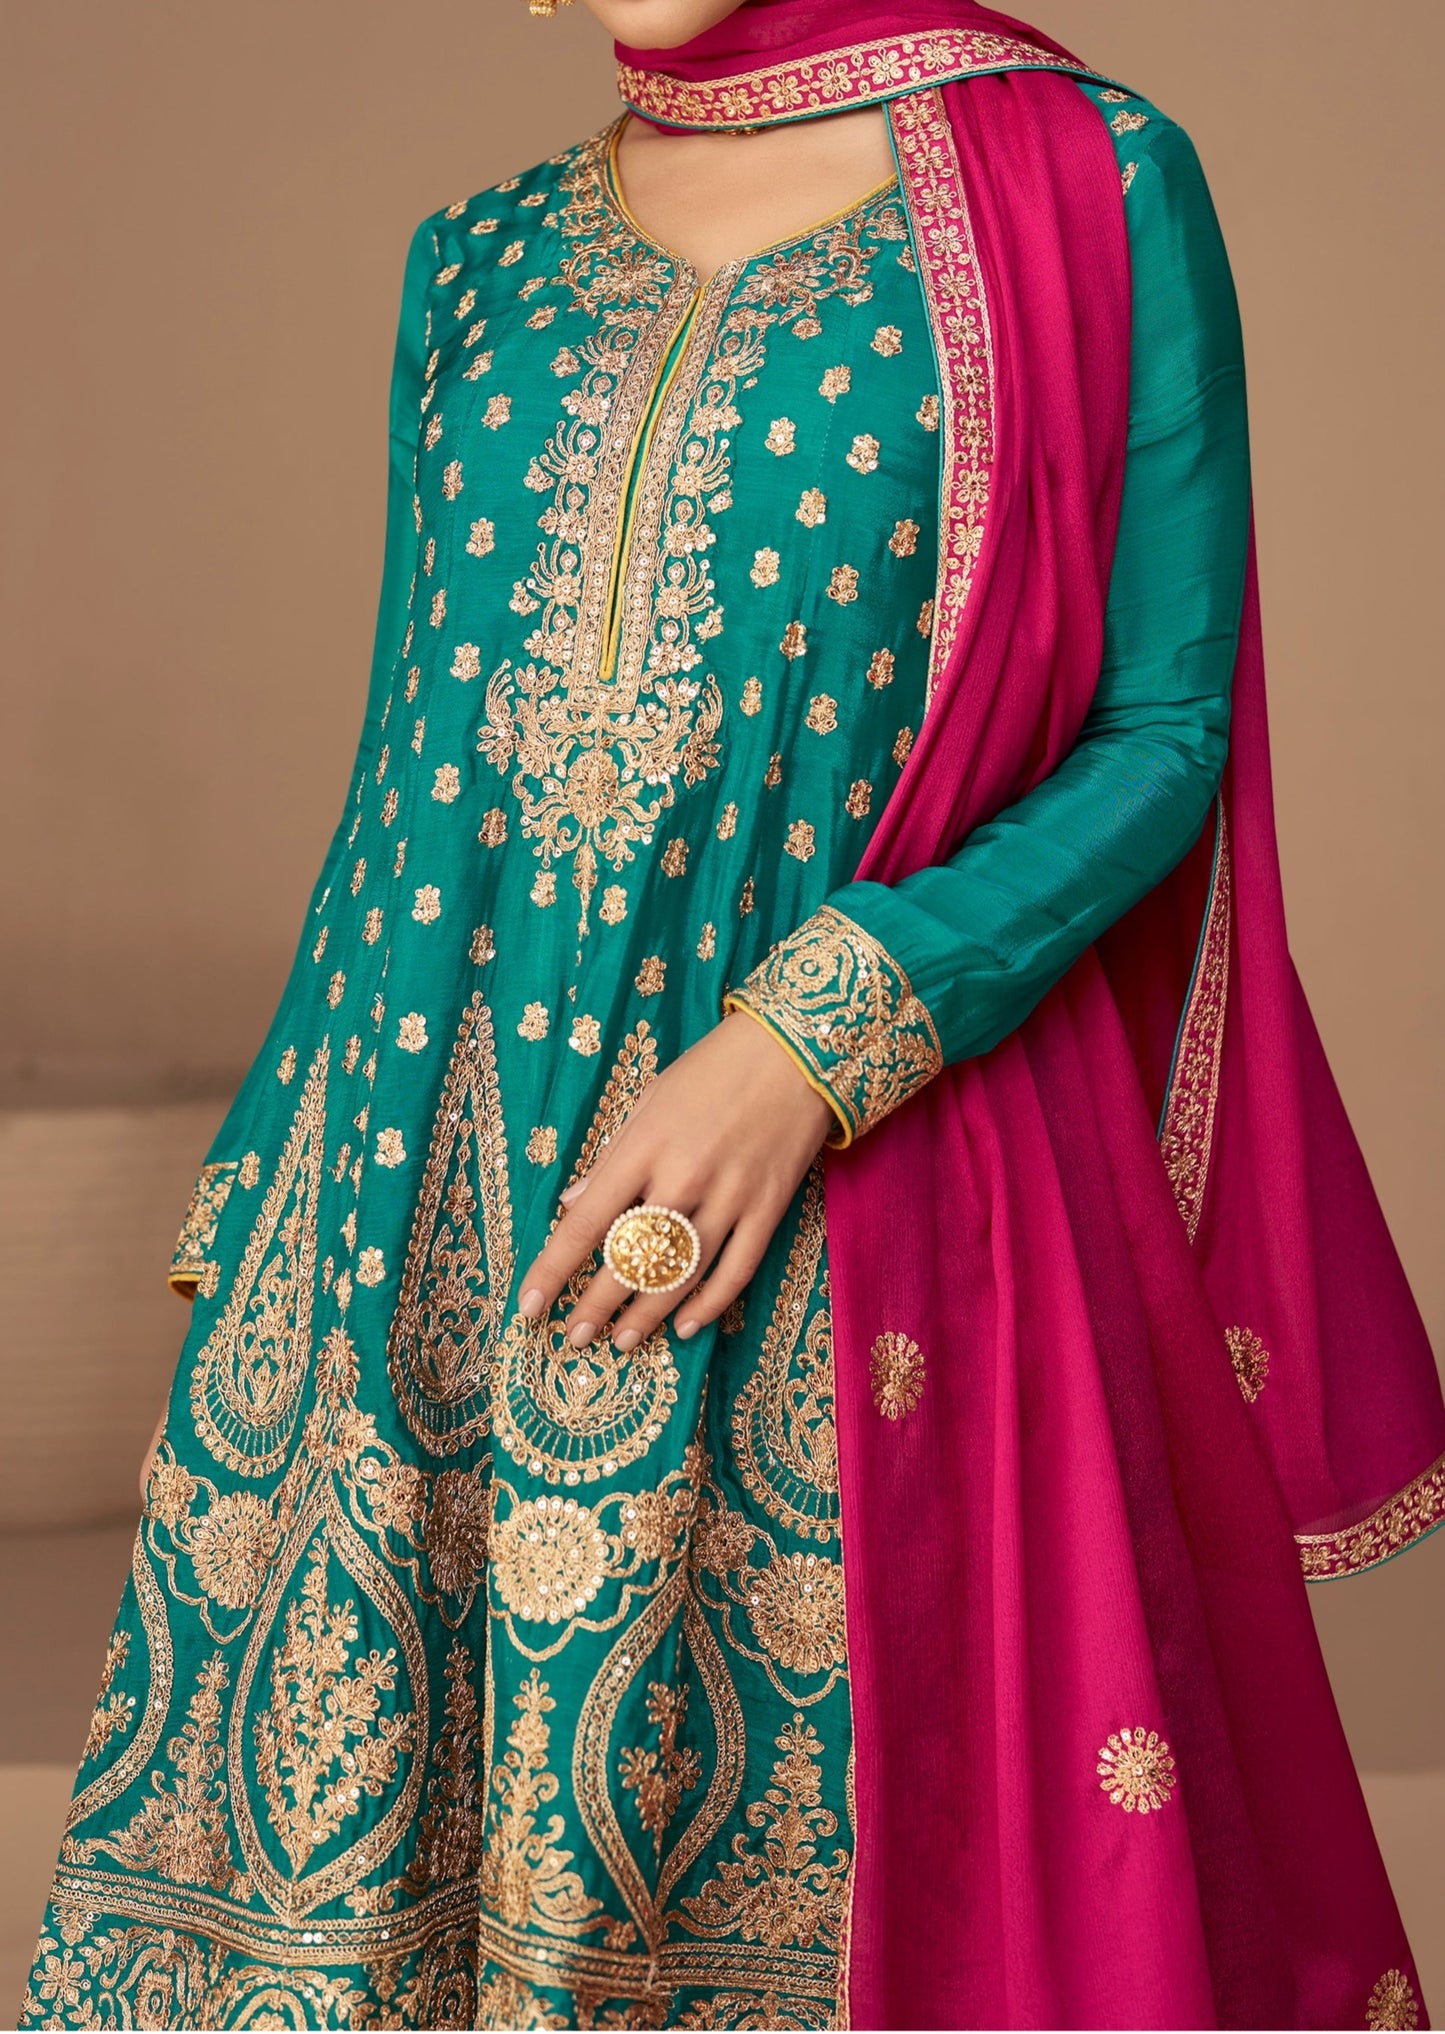 Blue suit design for woman with red dupatta